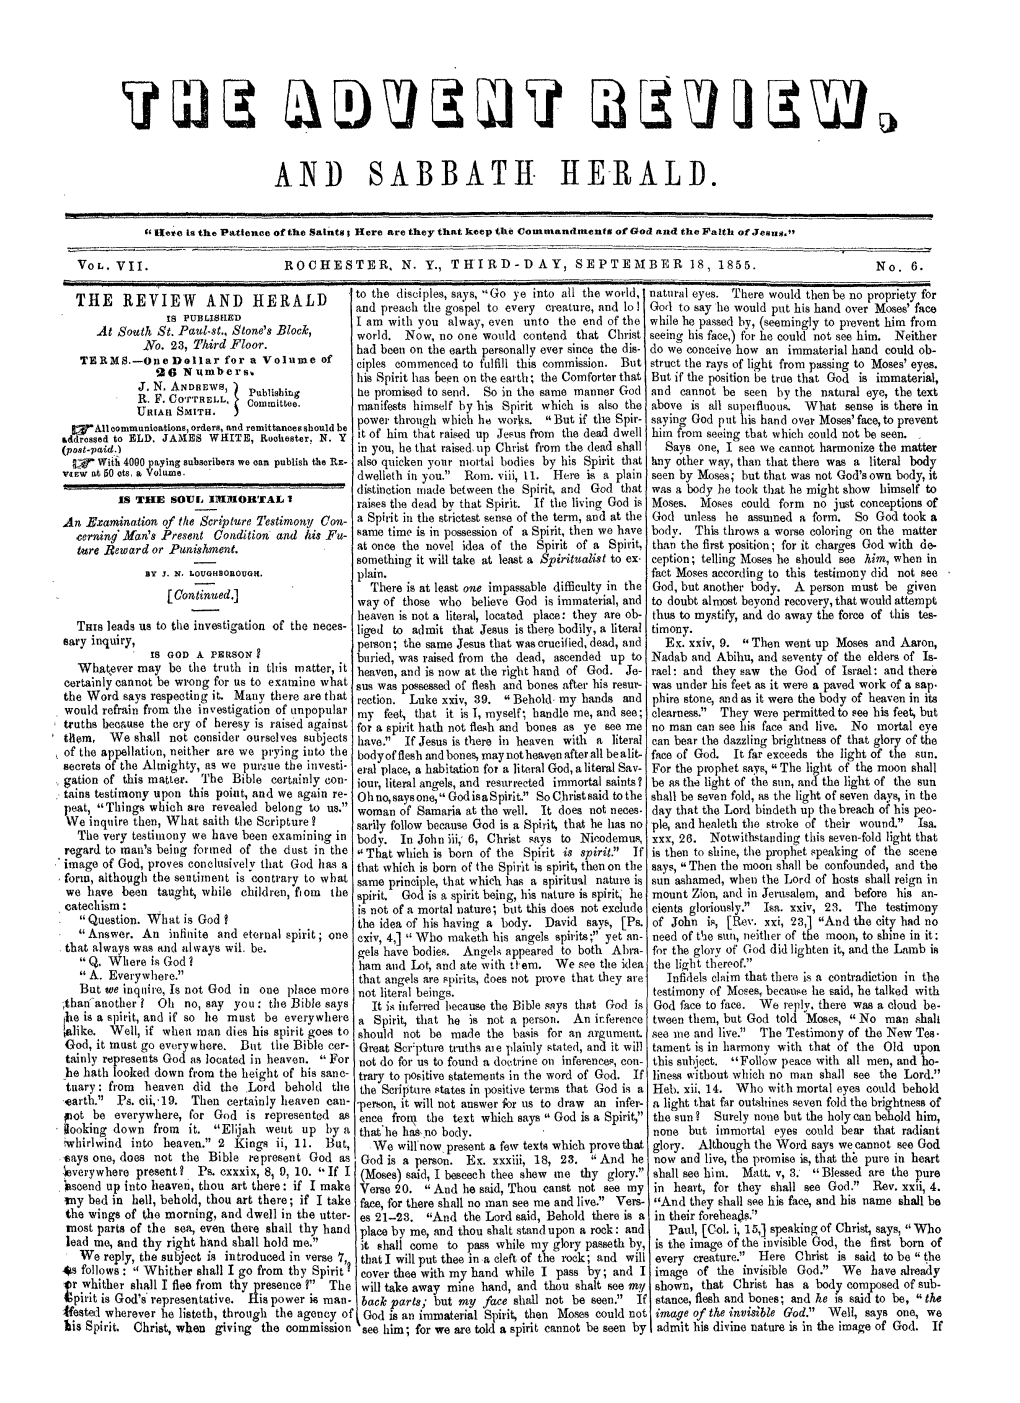 Review and Herald for 1855